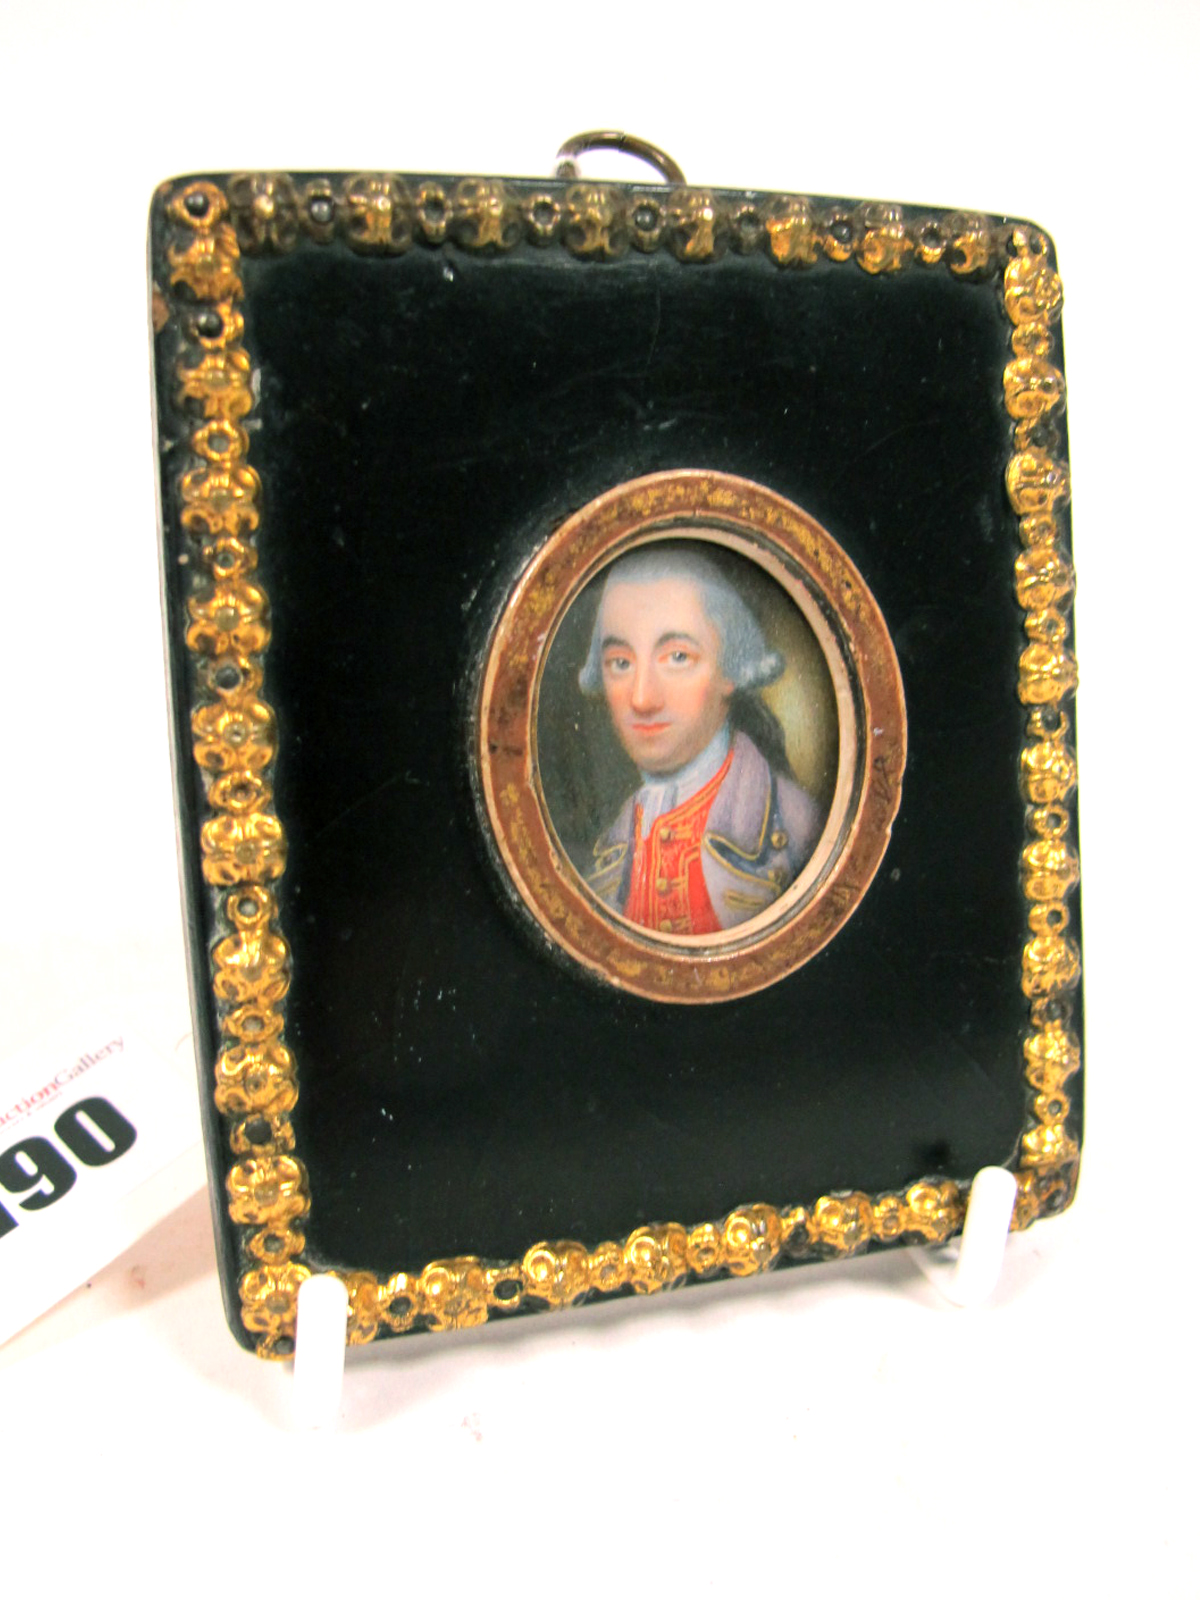 NATHANIEL HONE R.A. (1718-1784) Portrait Miniature of a gentleman, with powdered hair, wearing a